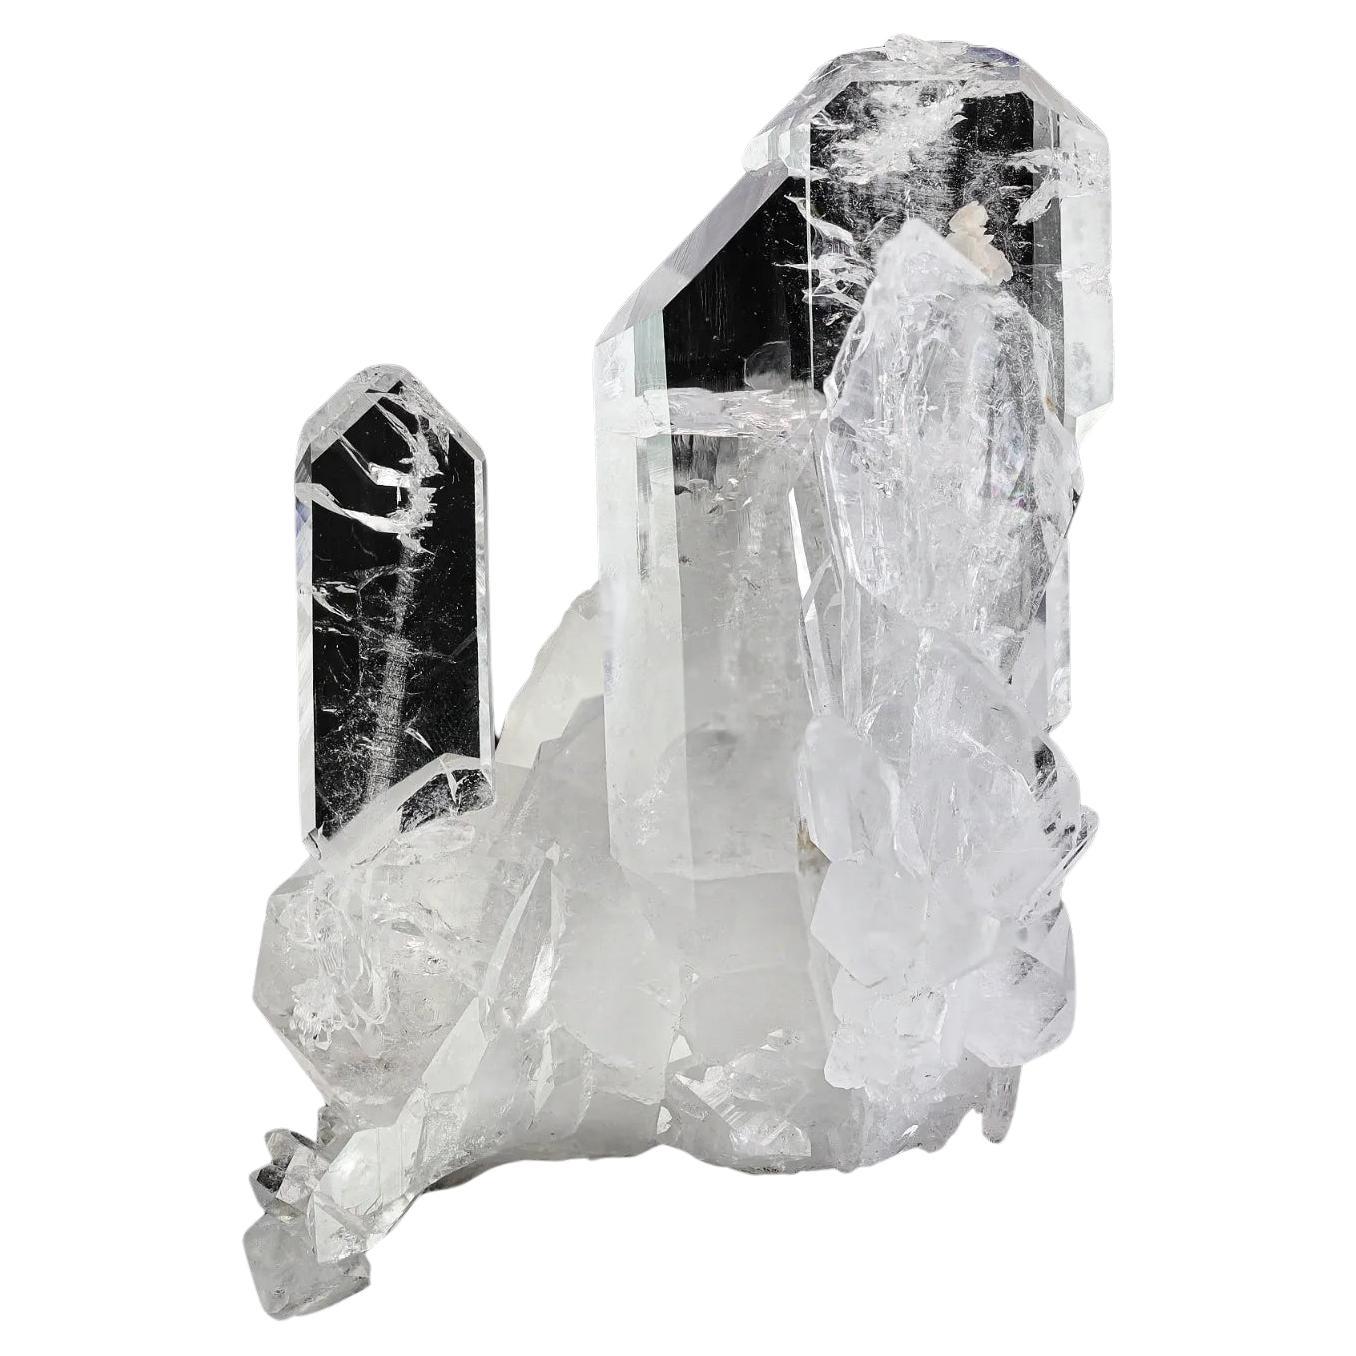 Artistic Formation Of Tabular Faden Clear Quartz Crystals Spacemen From Pakistan For Sale